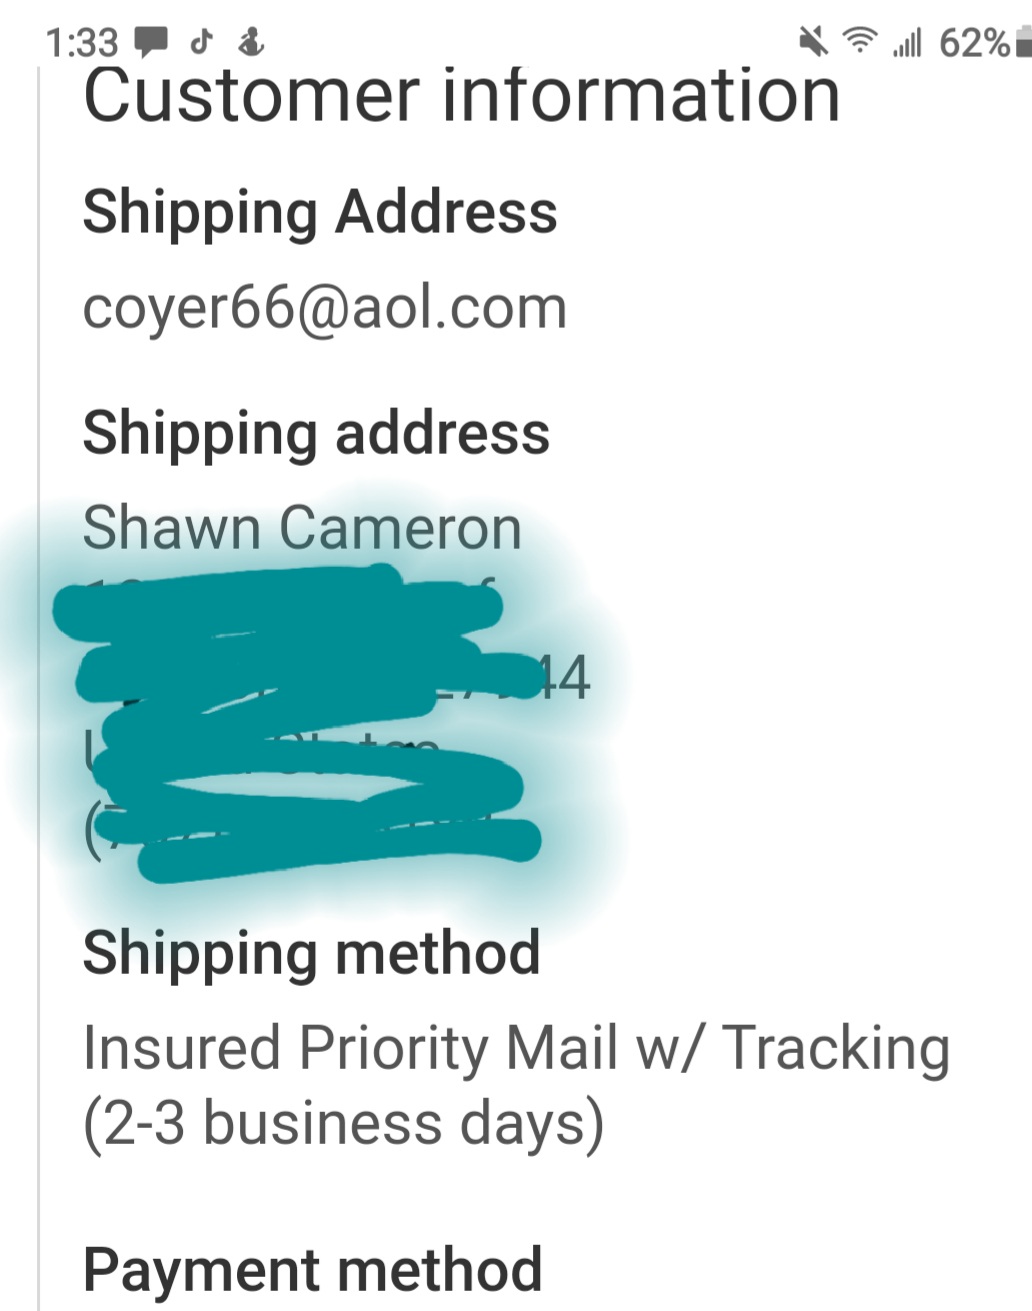 My order confirmation